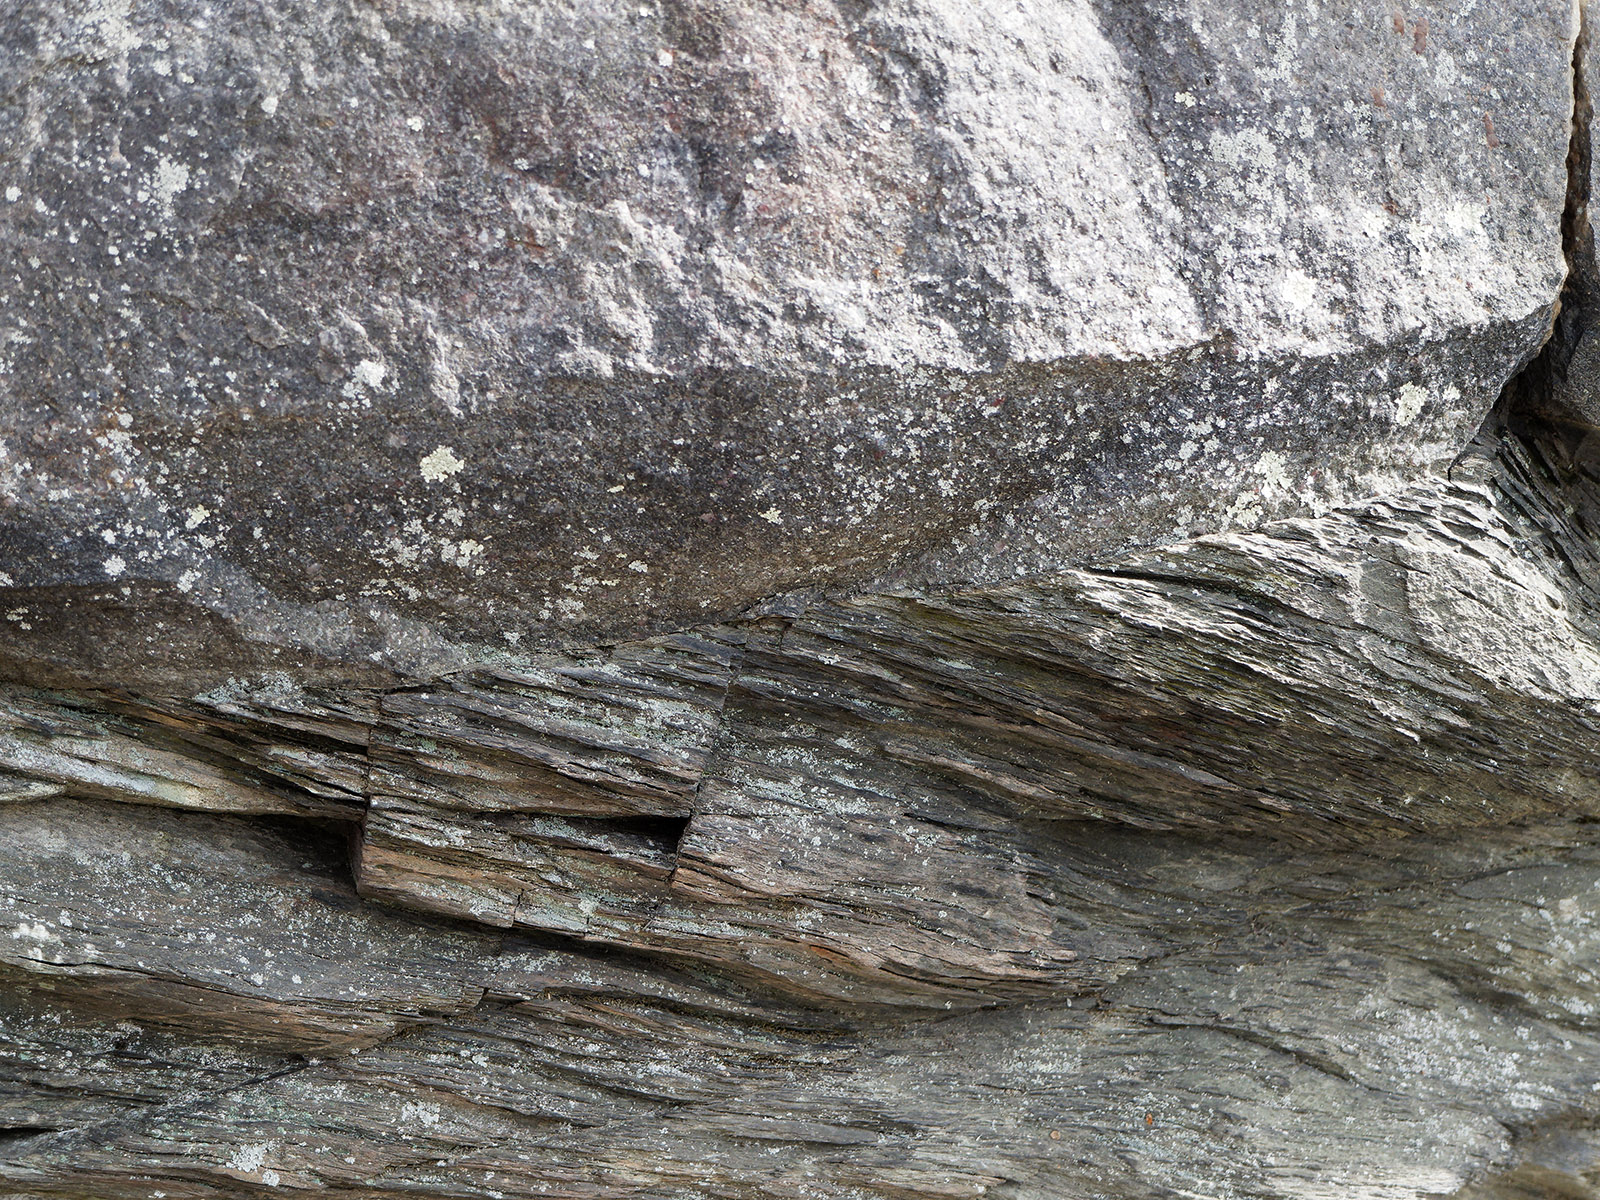 Junction between quartzite (upper) and phyllite (lower).  The greater striation and orientation is due to metamorphic alignment of sediments with high mica content.